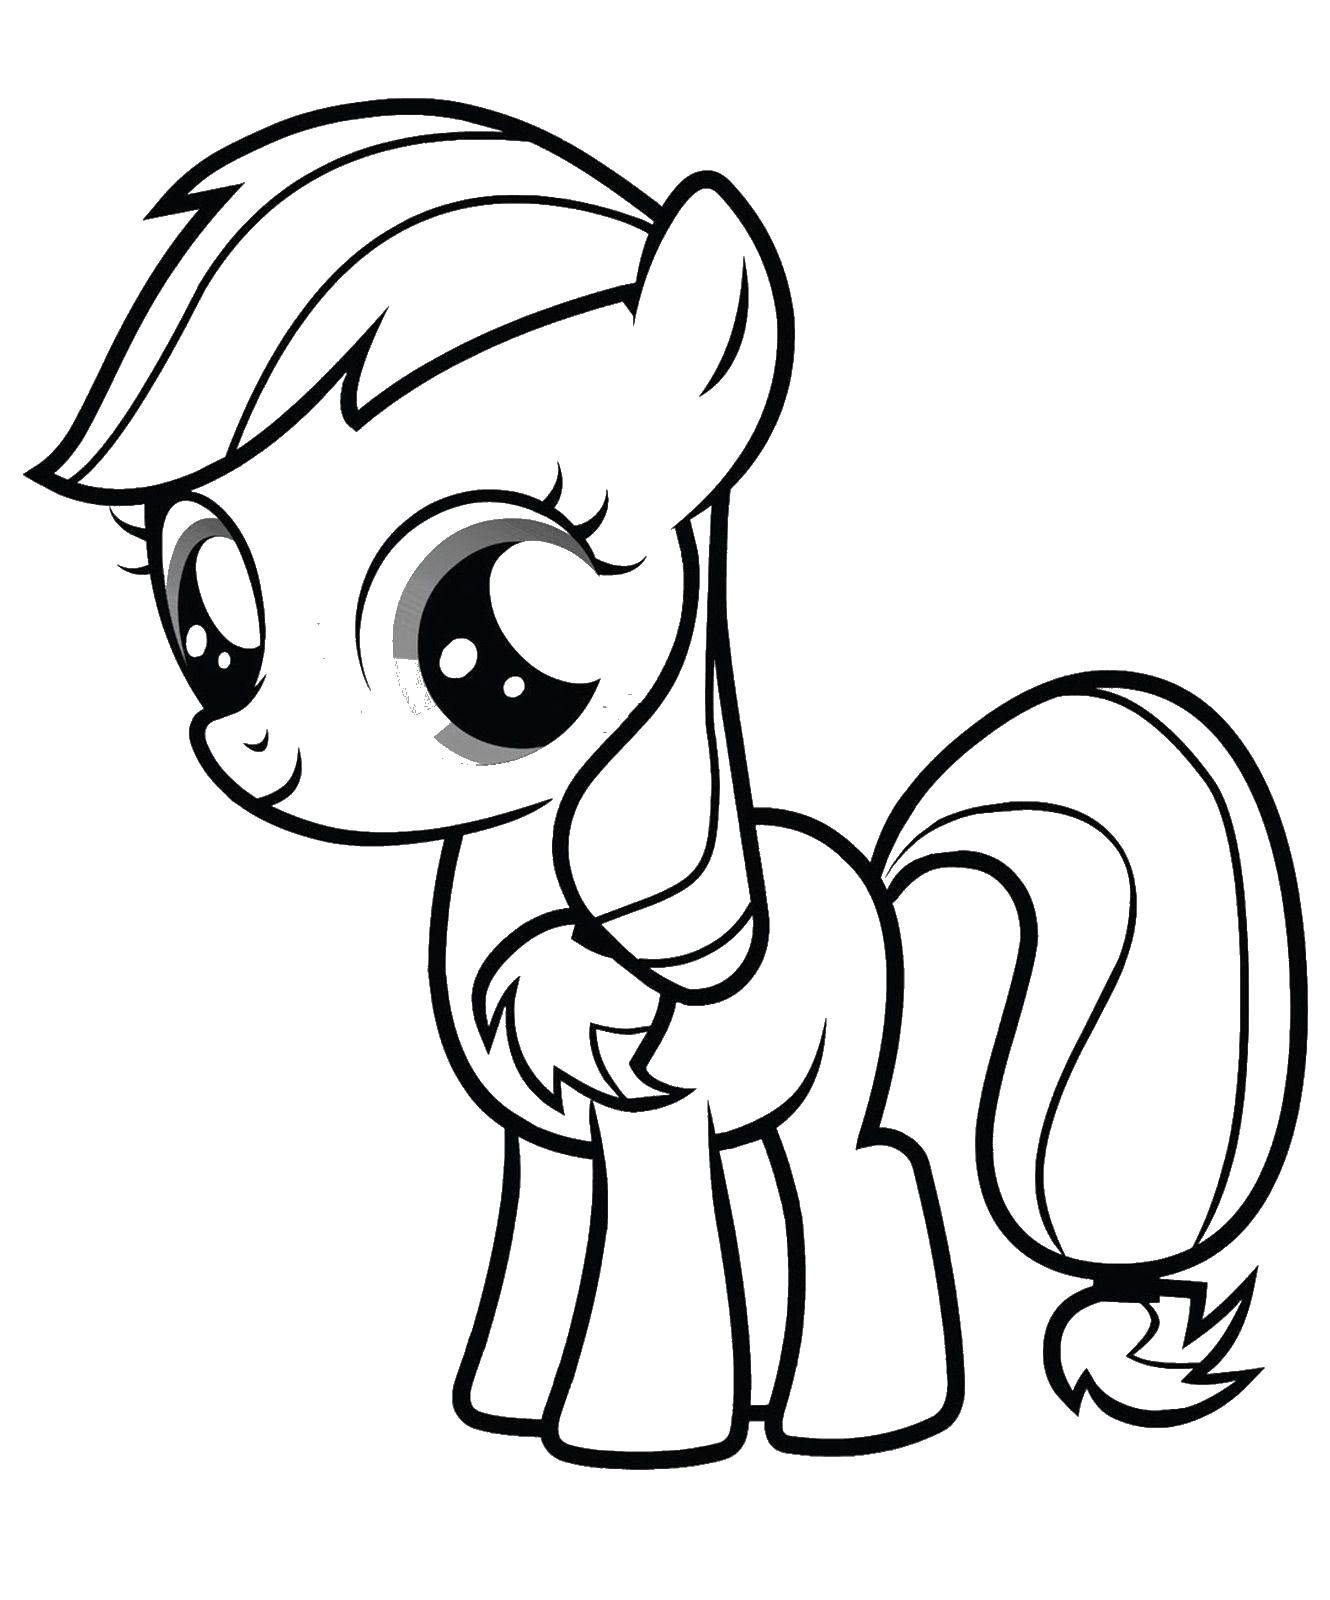 Coloring My little pony. Category coloring. Tags:  my little pony, ponies, cartoons.